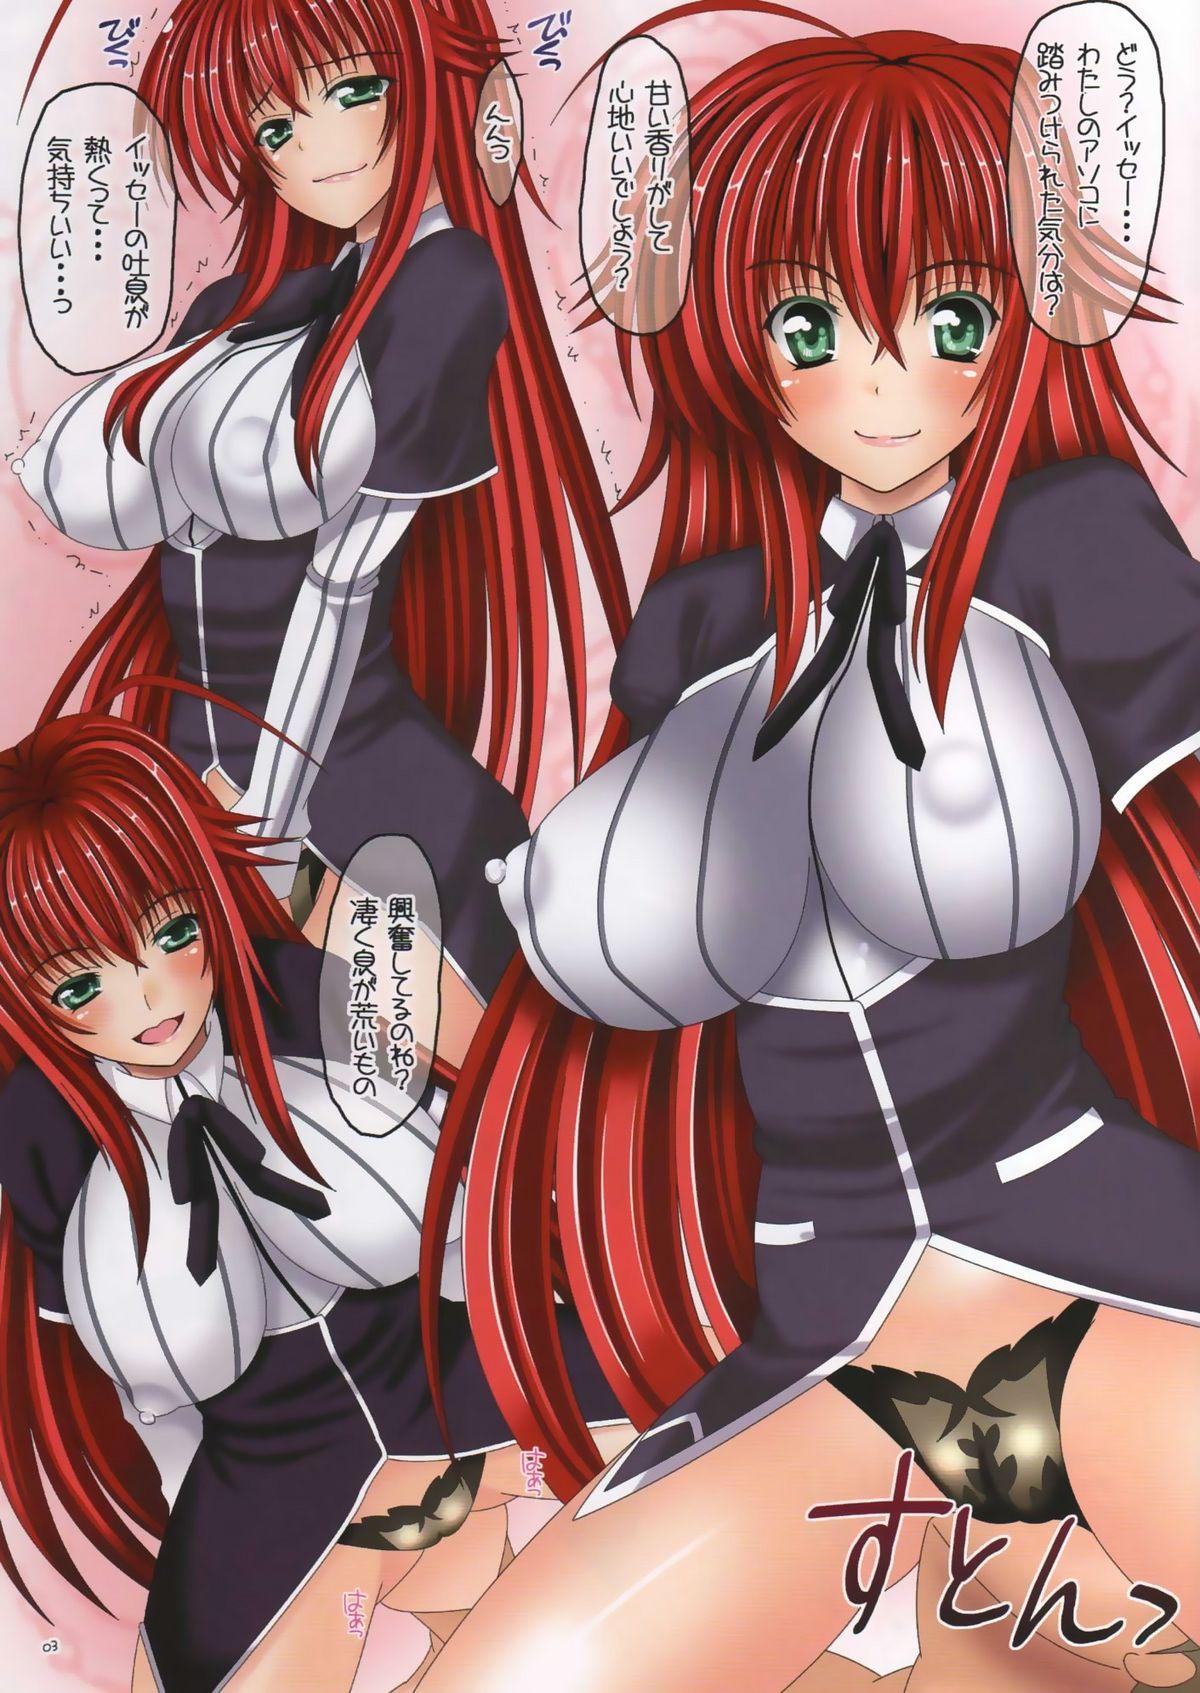 Perrito Colorful DxD - Highschool dxd Hardcore Sex - Page 2